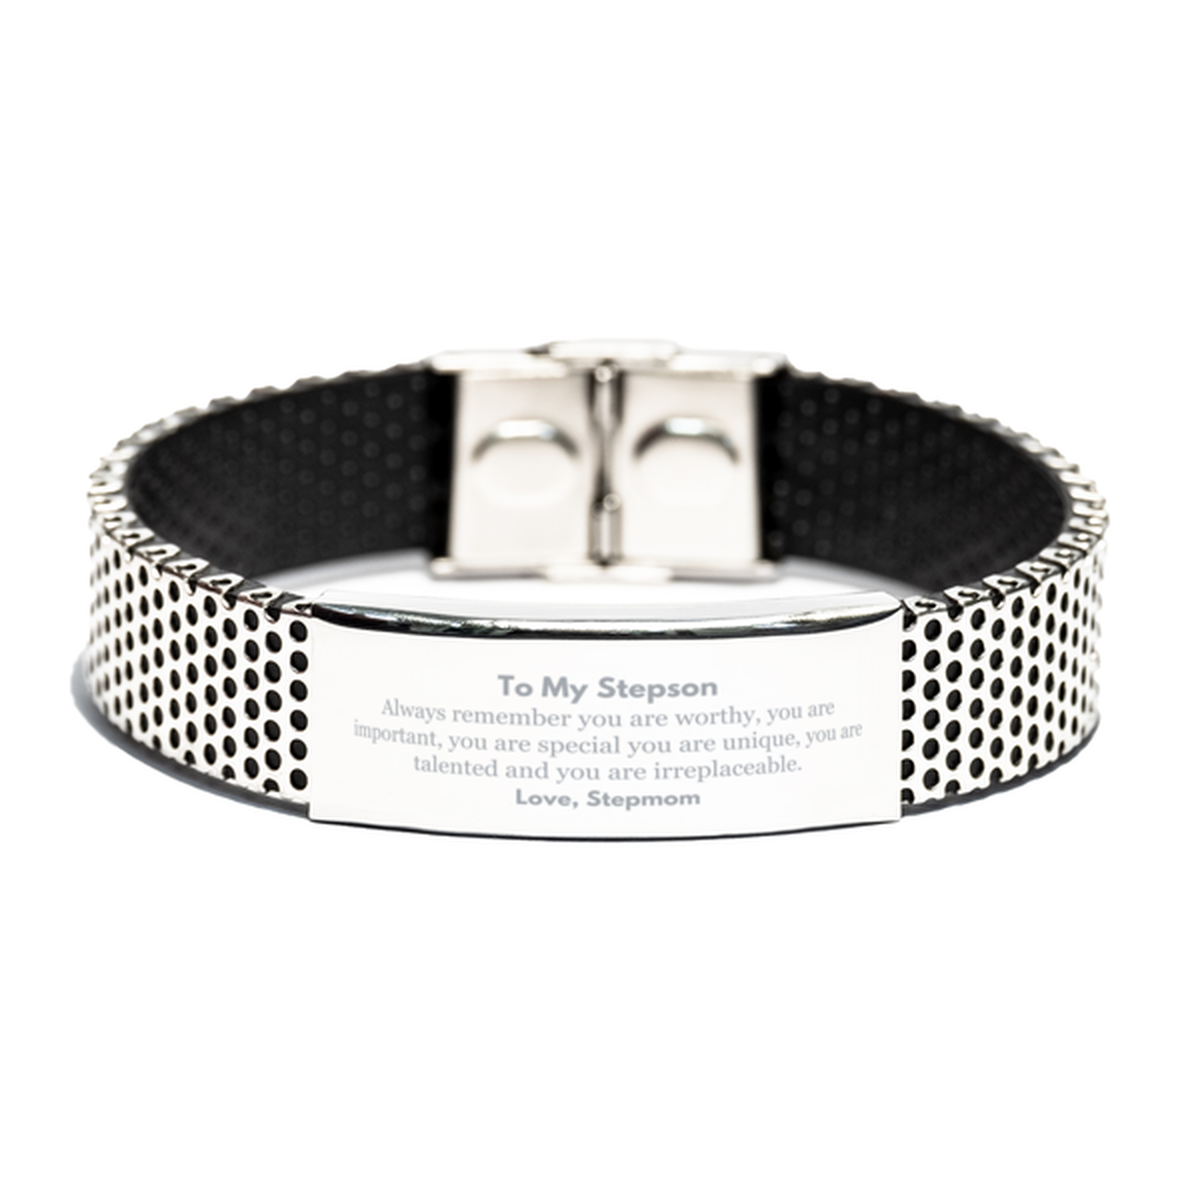 Stepson Birthday Gifts from Stepmom, Inspirational Stainless Steel Bracelet for Stepson Christmas Graduation Gifts for Stepson Always remember you are worthy, you are important. Love, Stepmom